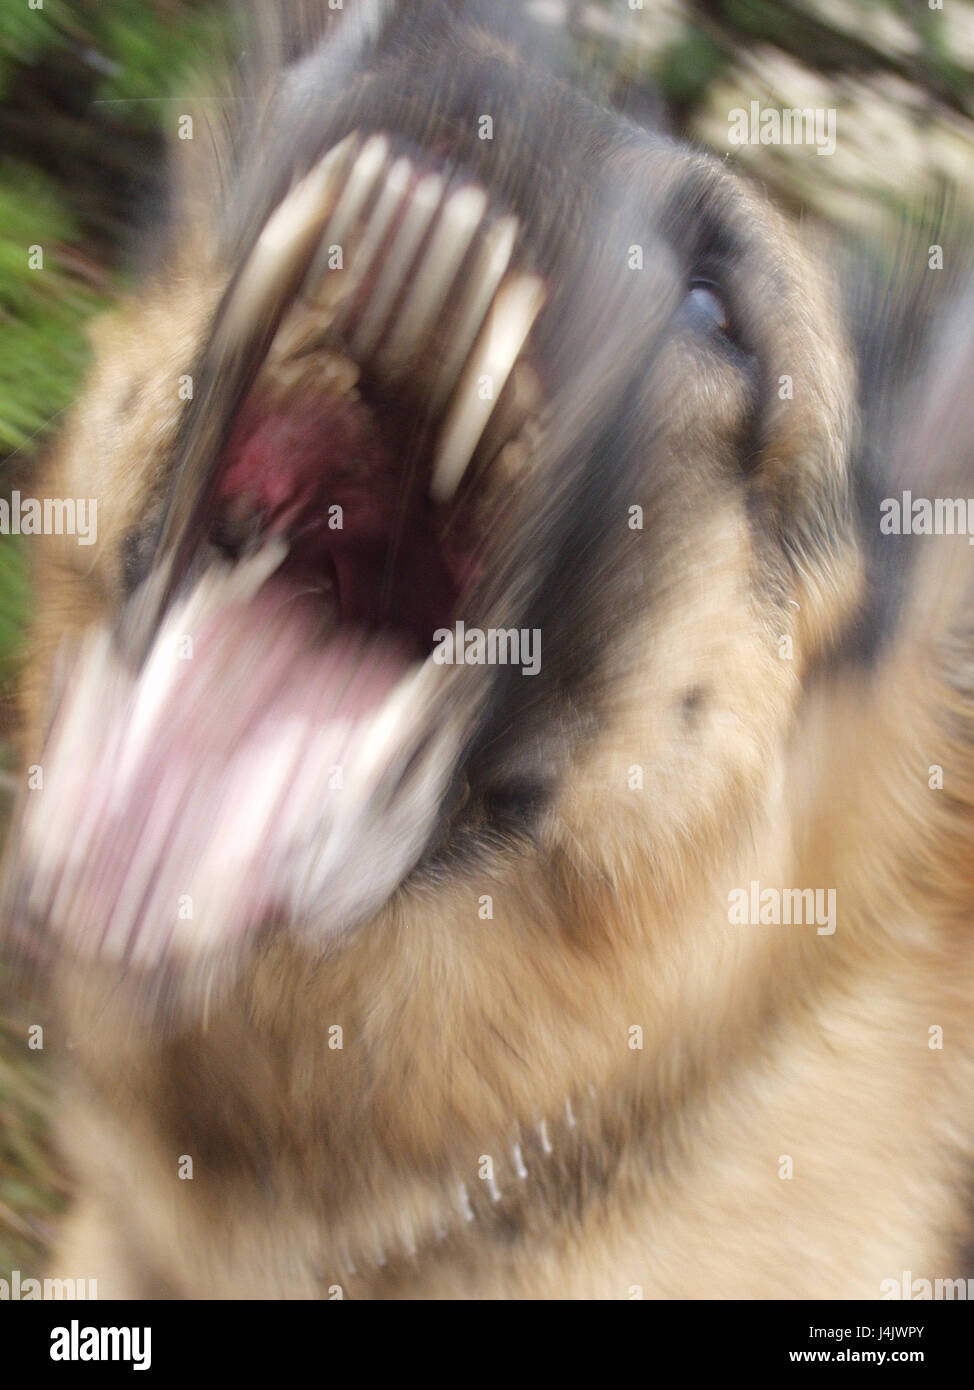 Dog, mouth, cogs, aggression, danger, s/w mammal, pet dog, protective dog, bite, attack, attack, defend, defence, aggressively, danger, fear, frights, threat, threat, threateningly, wildly, dangerously, nightmare Stock Photo